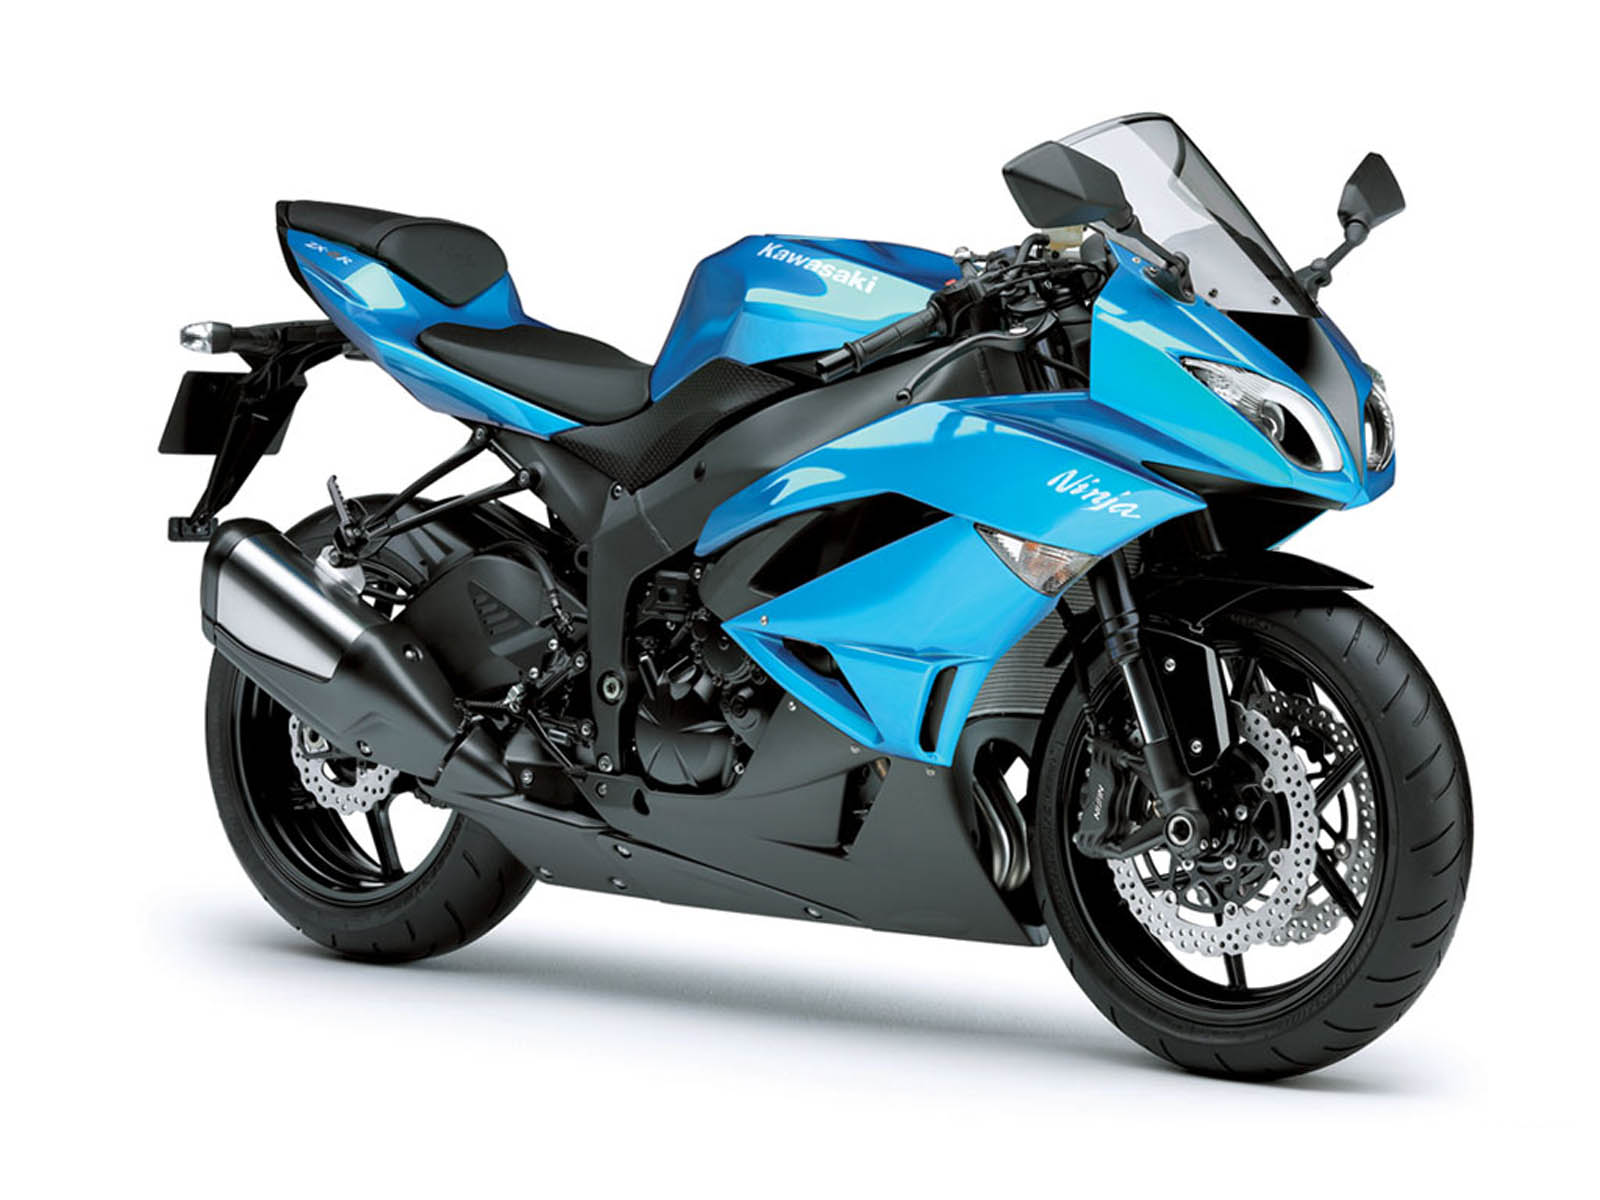 Ninja Zx 6r Bike Wallpaper Image Photos Pictures And Background